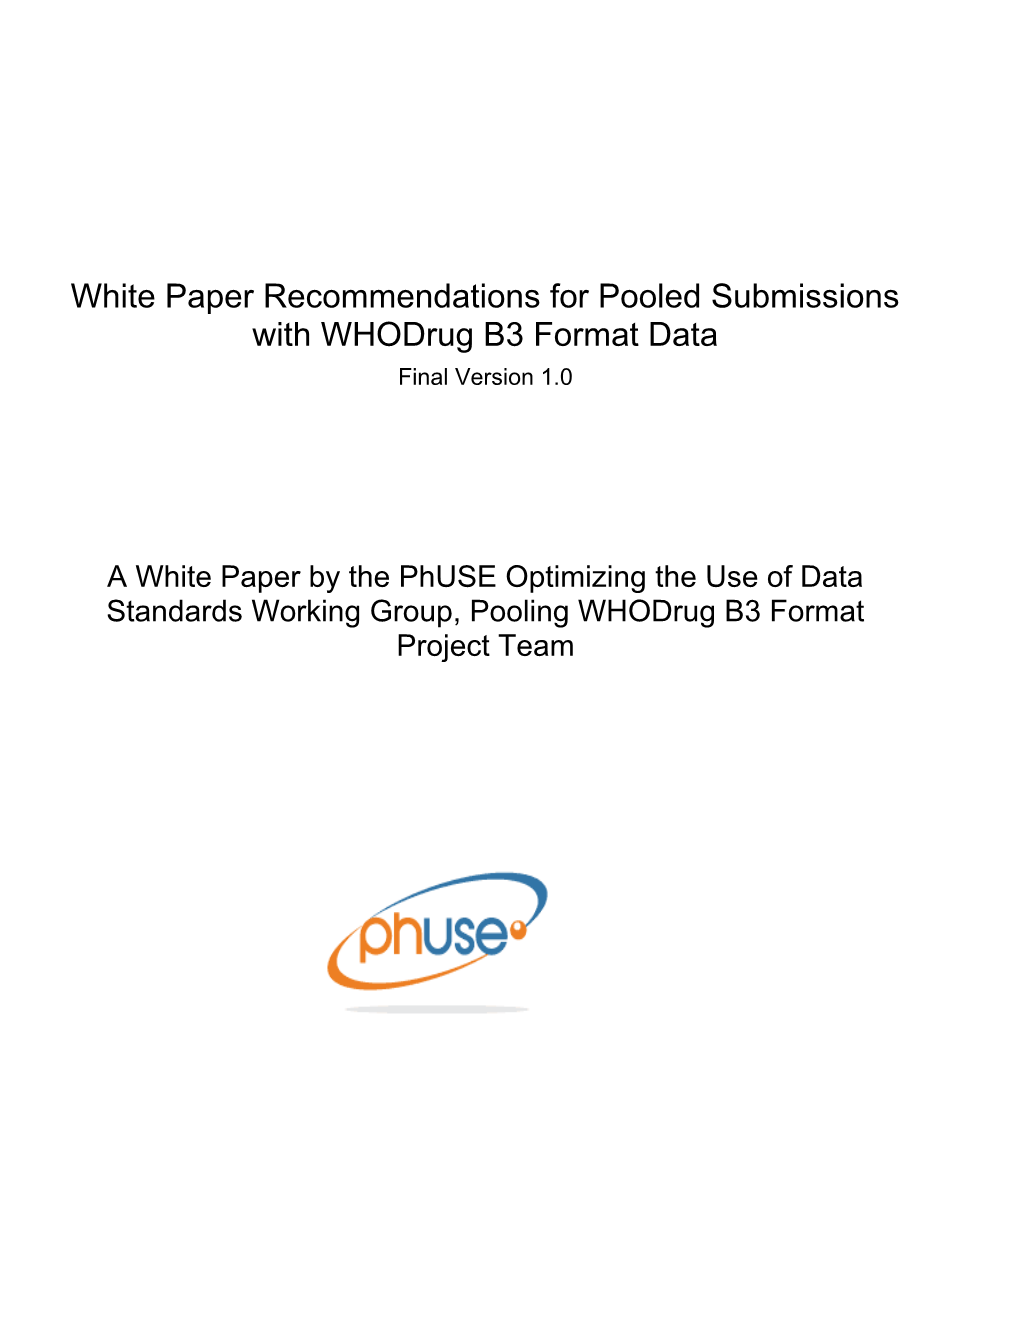 White Paper Recommendations for Pooled Submissions with Whodrug B3 Format Data